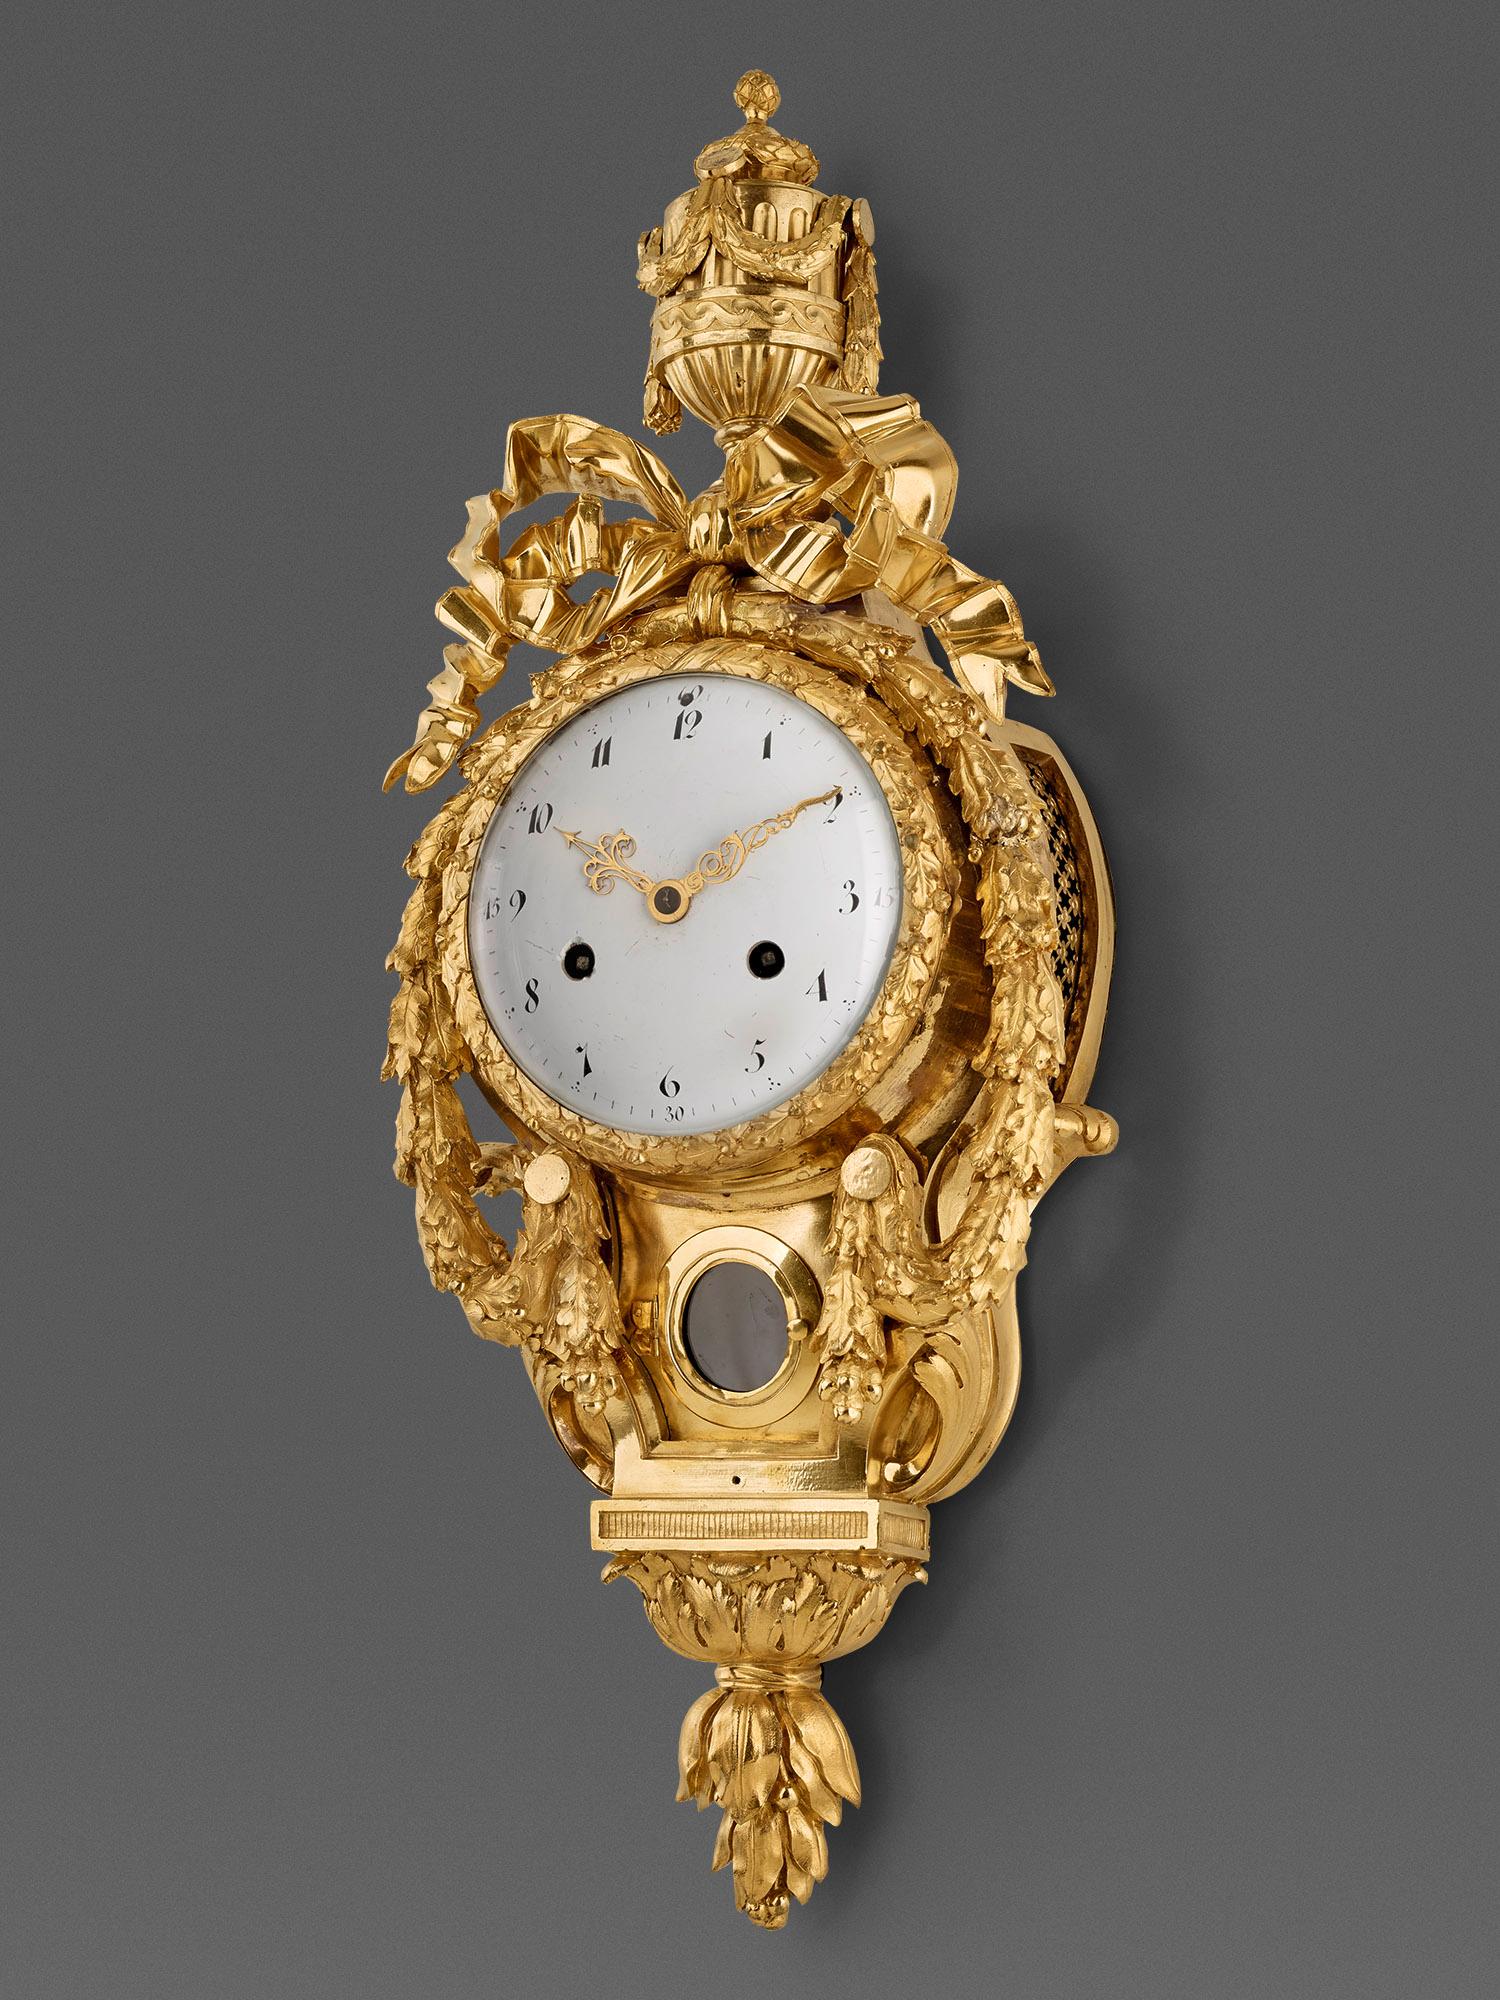 Cartel Gold Plated Wall Clock with Vase Top, Paris, Late 18th Century, Louis XVI For Sale 1